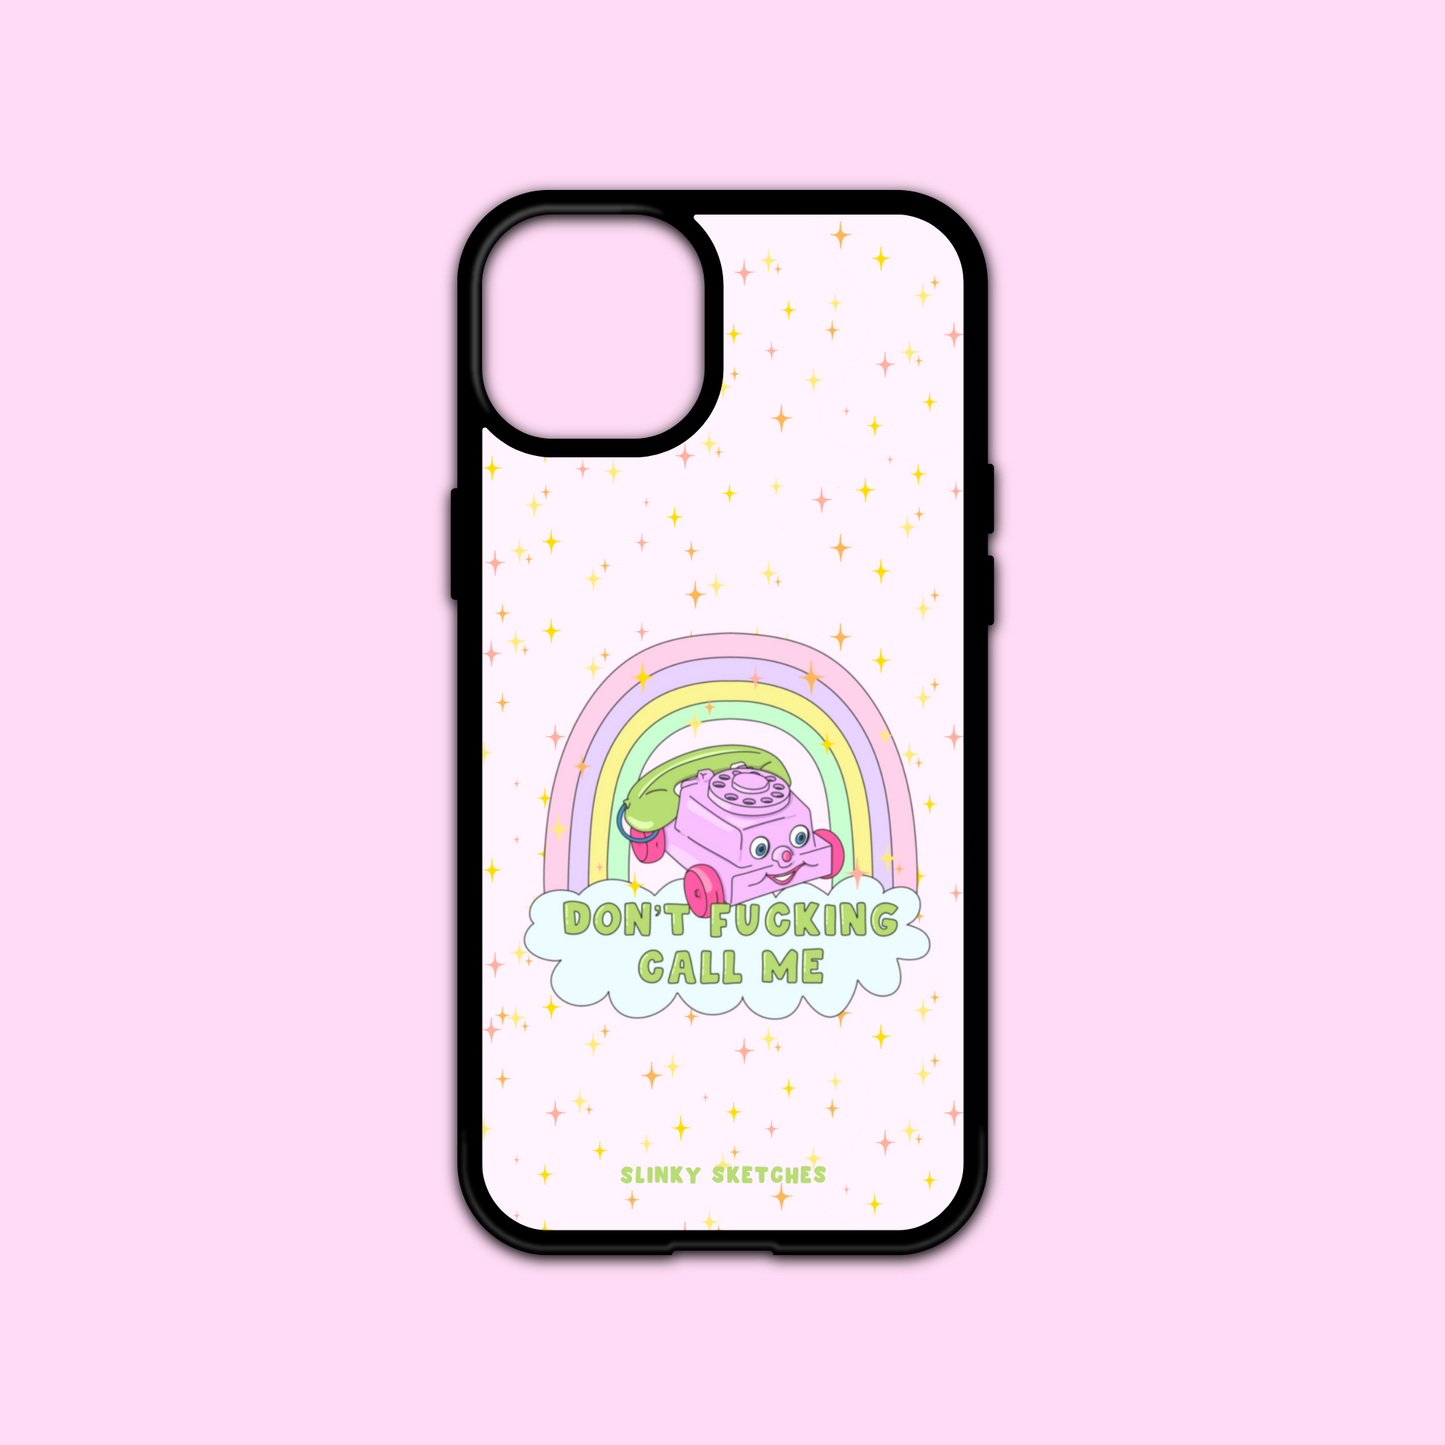 Don't Call Me Phone Case